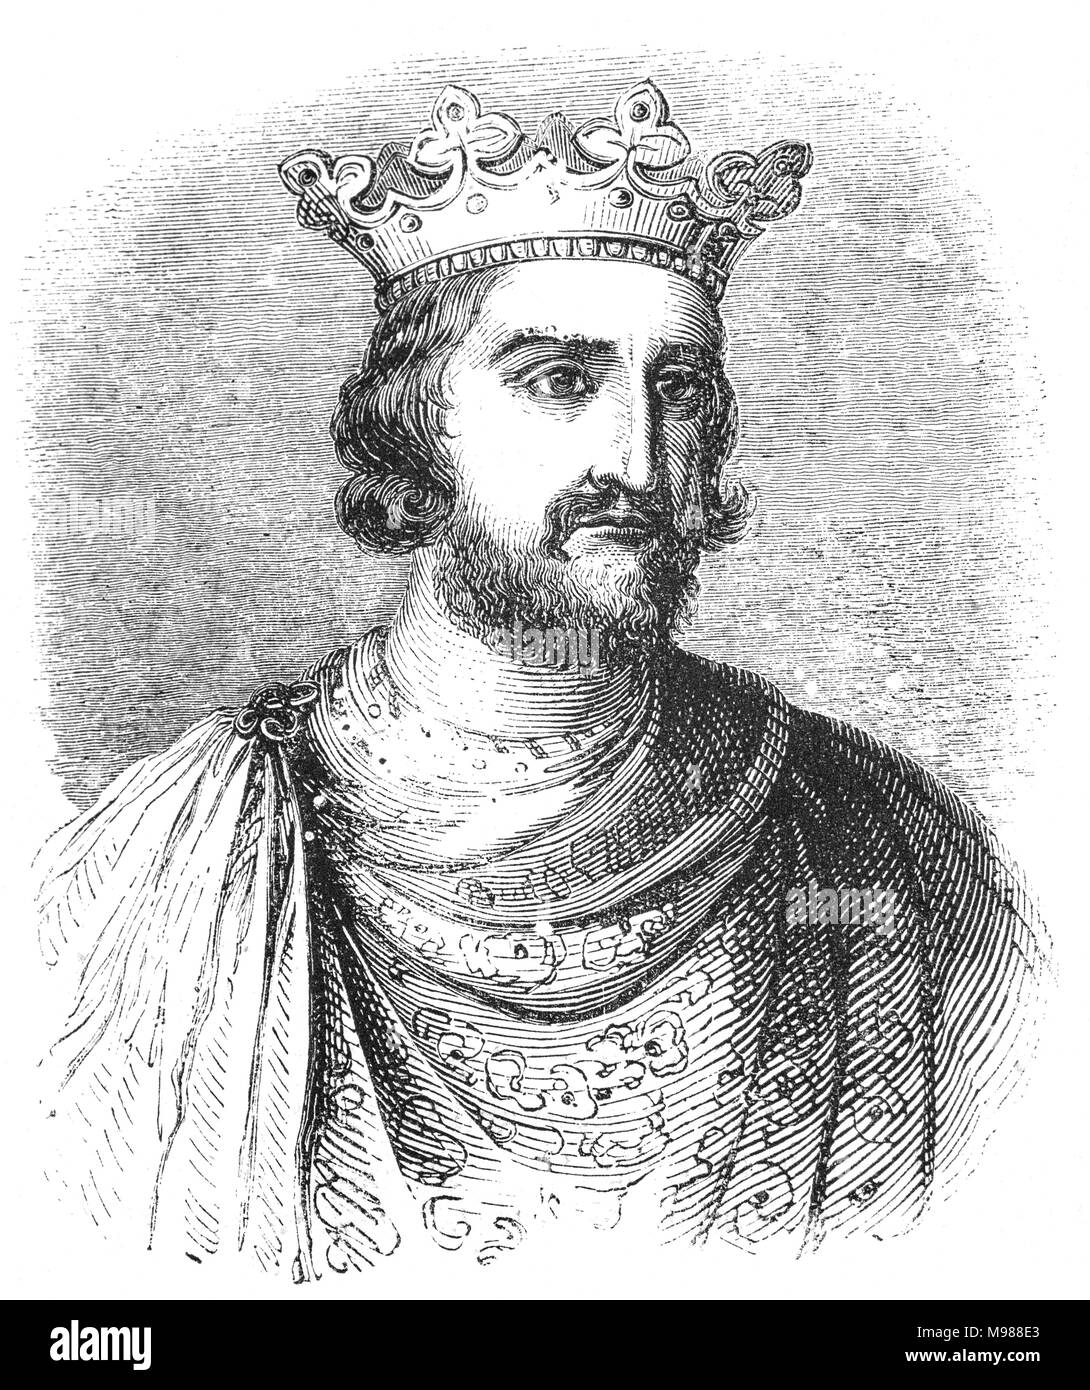 Portrait of Henry III (1207 – 1272), also known as Henry of Winchester, was King of England, Lord of Ireland, and Duke of Aquitaine from 1216 until his death. The son of King John and Isabella of Angoulême, Henry assumed the throne when he was only nine in the middle of the First Barons' War. Cardinal Guala declared the war against the rebel barons to be a religious crusade and Henry's forces, led by William Marshal, defeated the rebels at the battles of Lincoln and Sandwich in 1217. Stock Photo